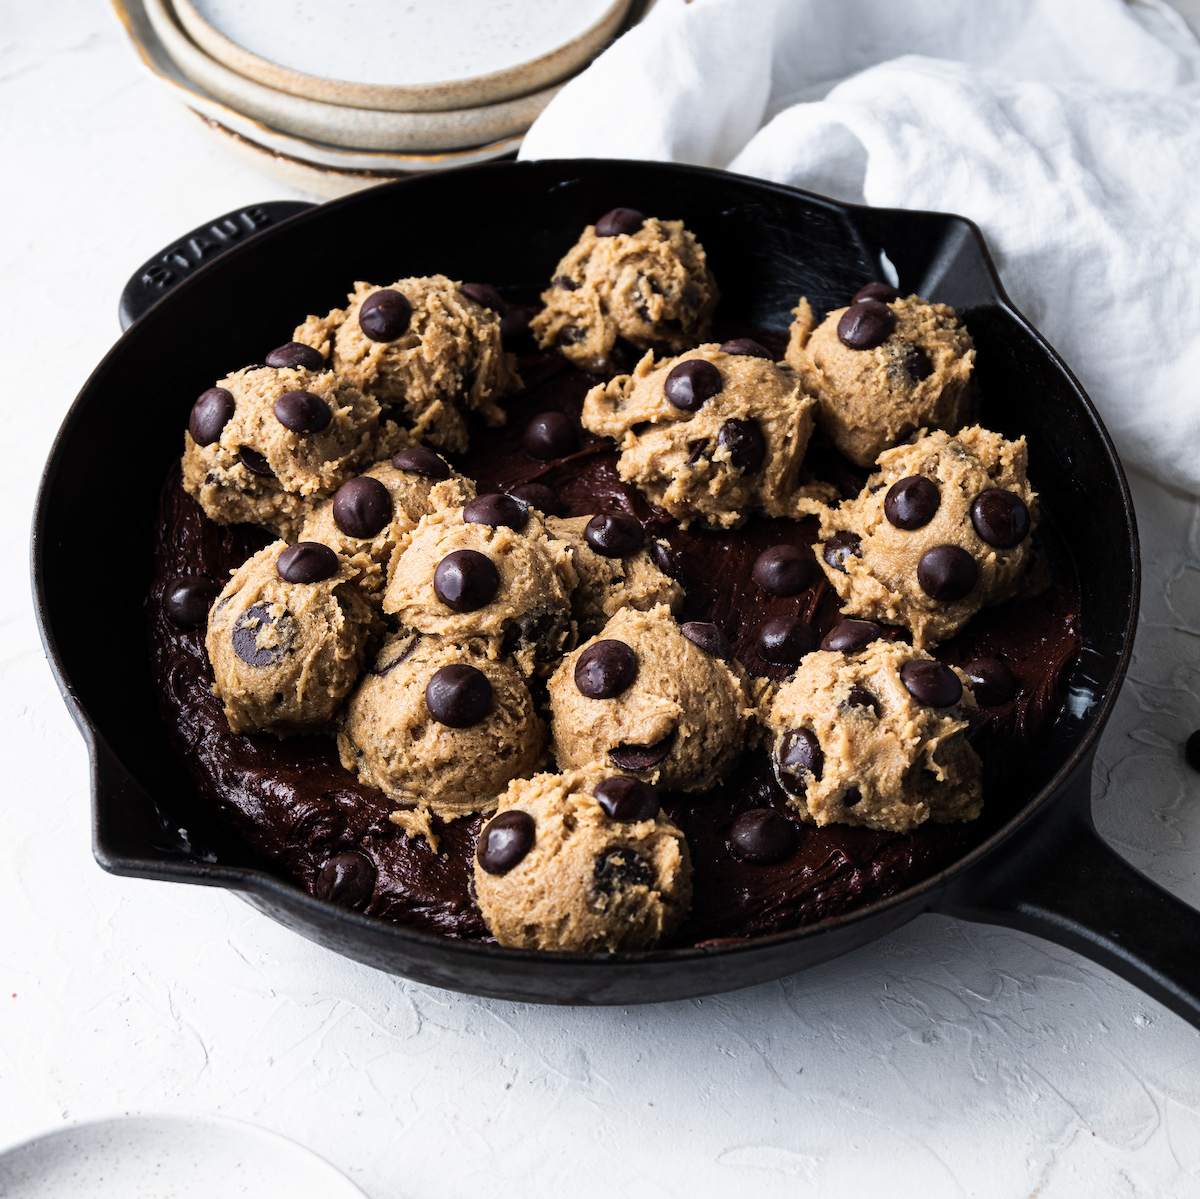 The unbaked ultimate skillet brookies with chocolate chips sprinkled on top